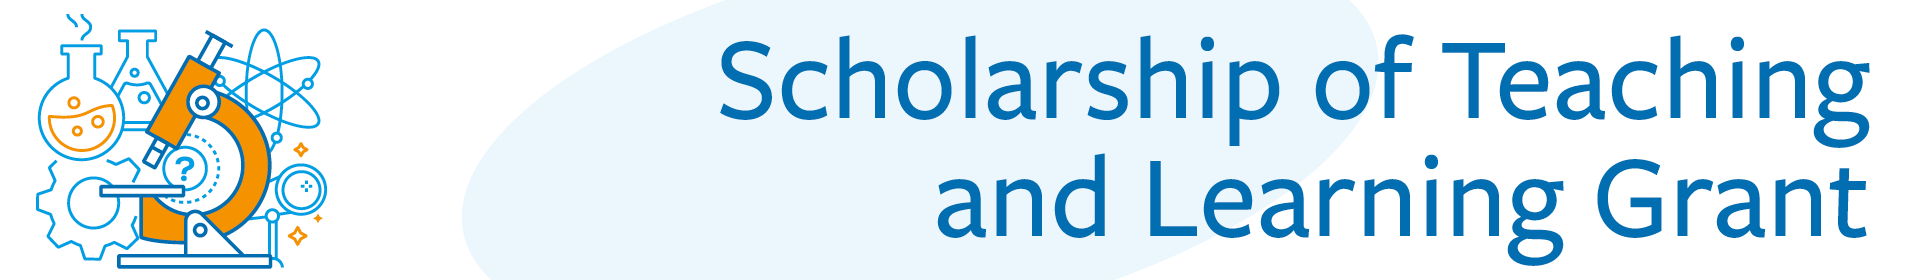 Scholarship of Teaching and Learning Grant